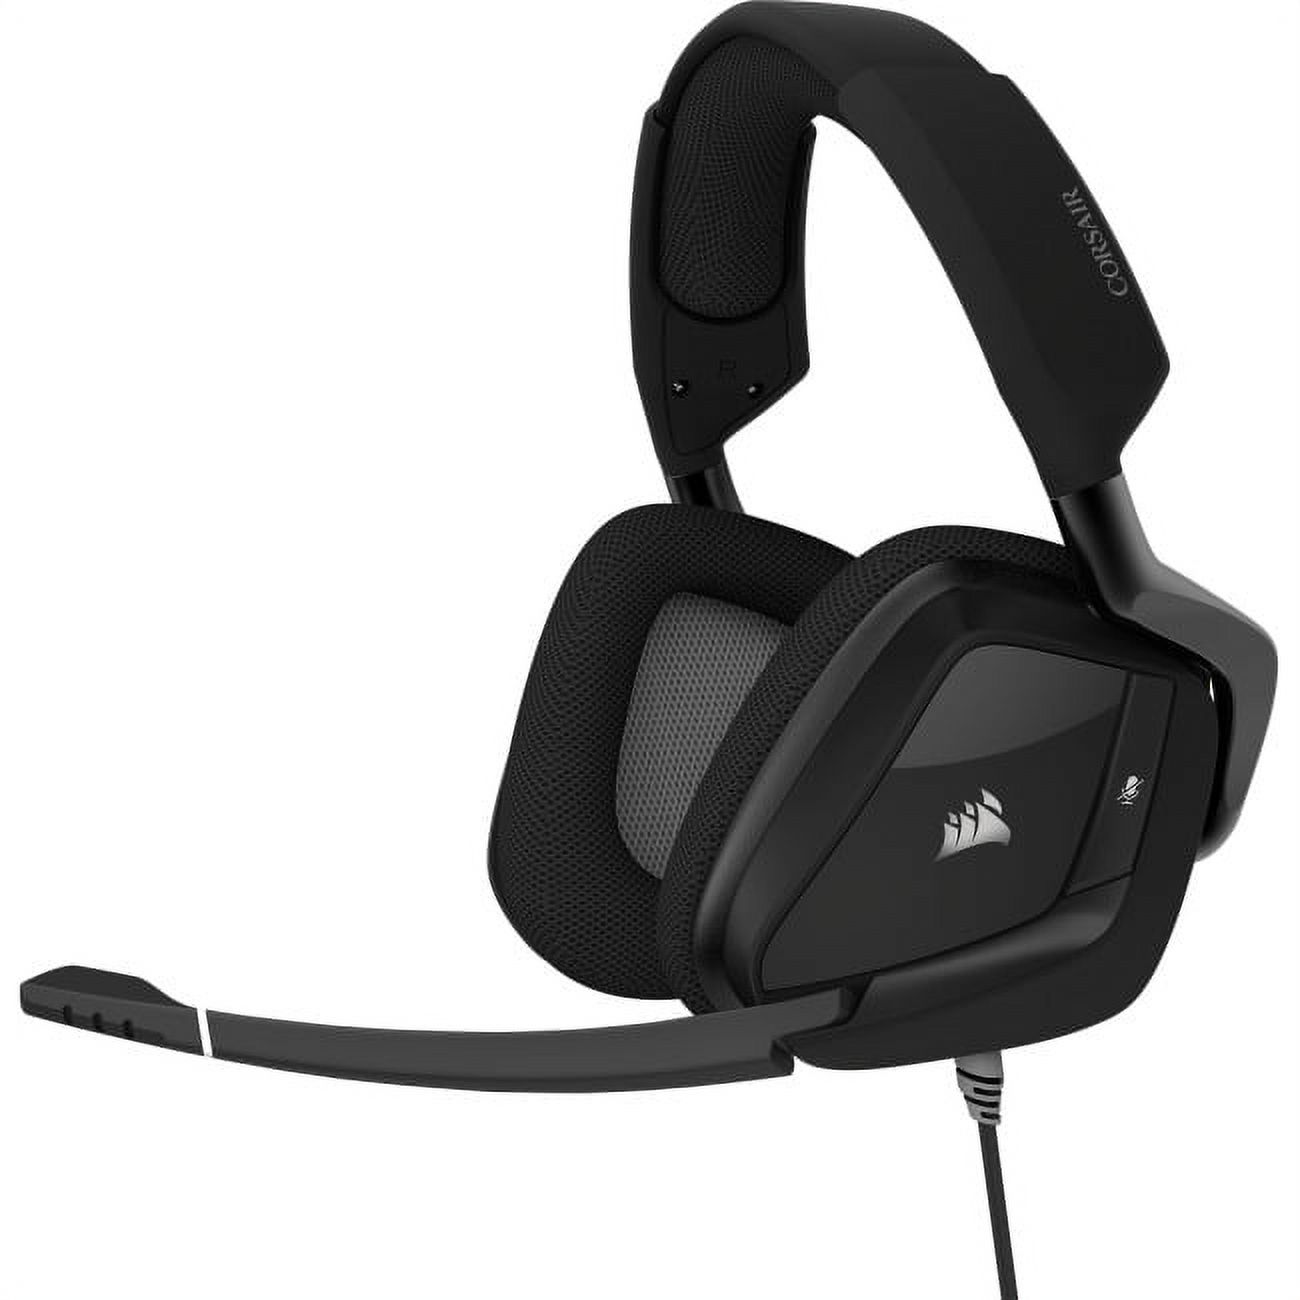 Corsair VOID PRO RGB USB Stereo Gaming Headset - Carbon - image 1 of 6